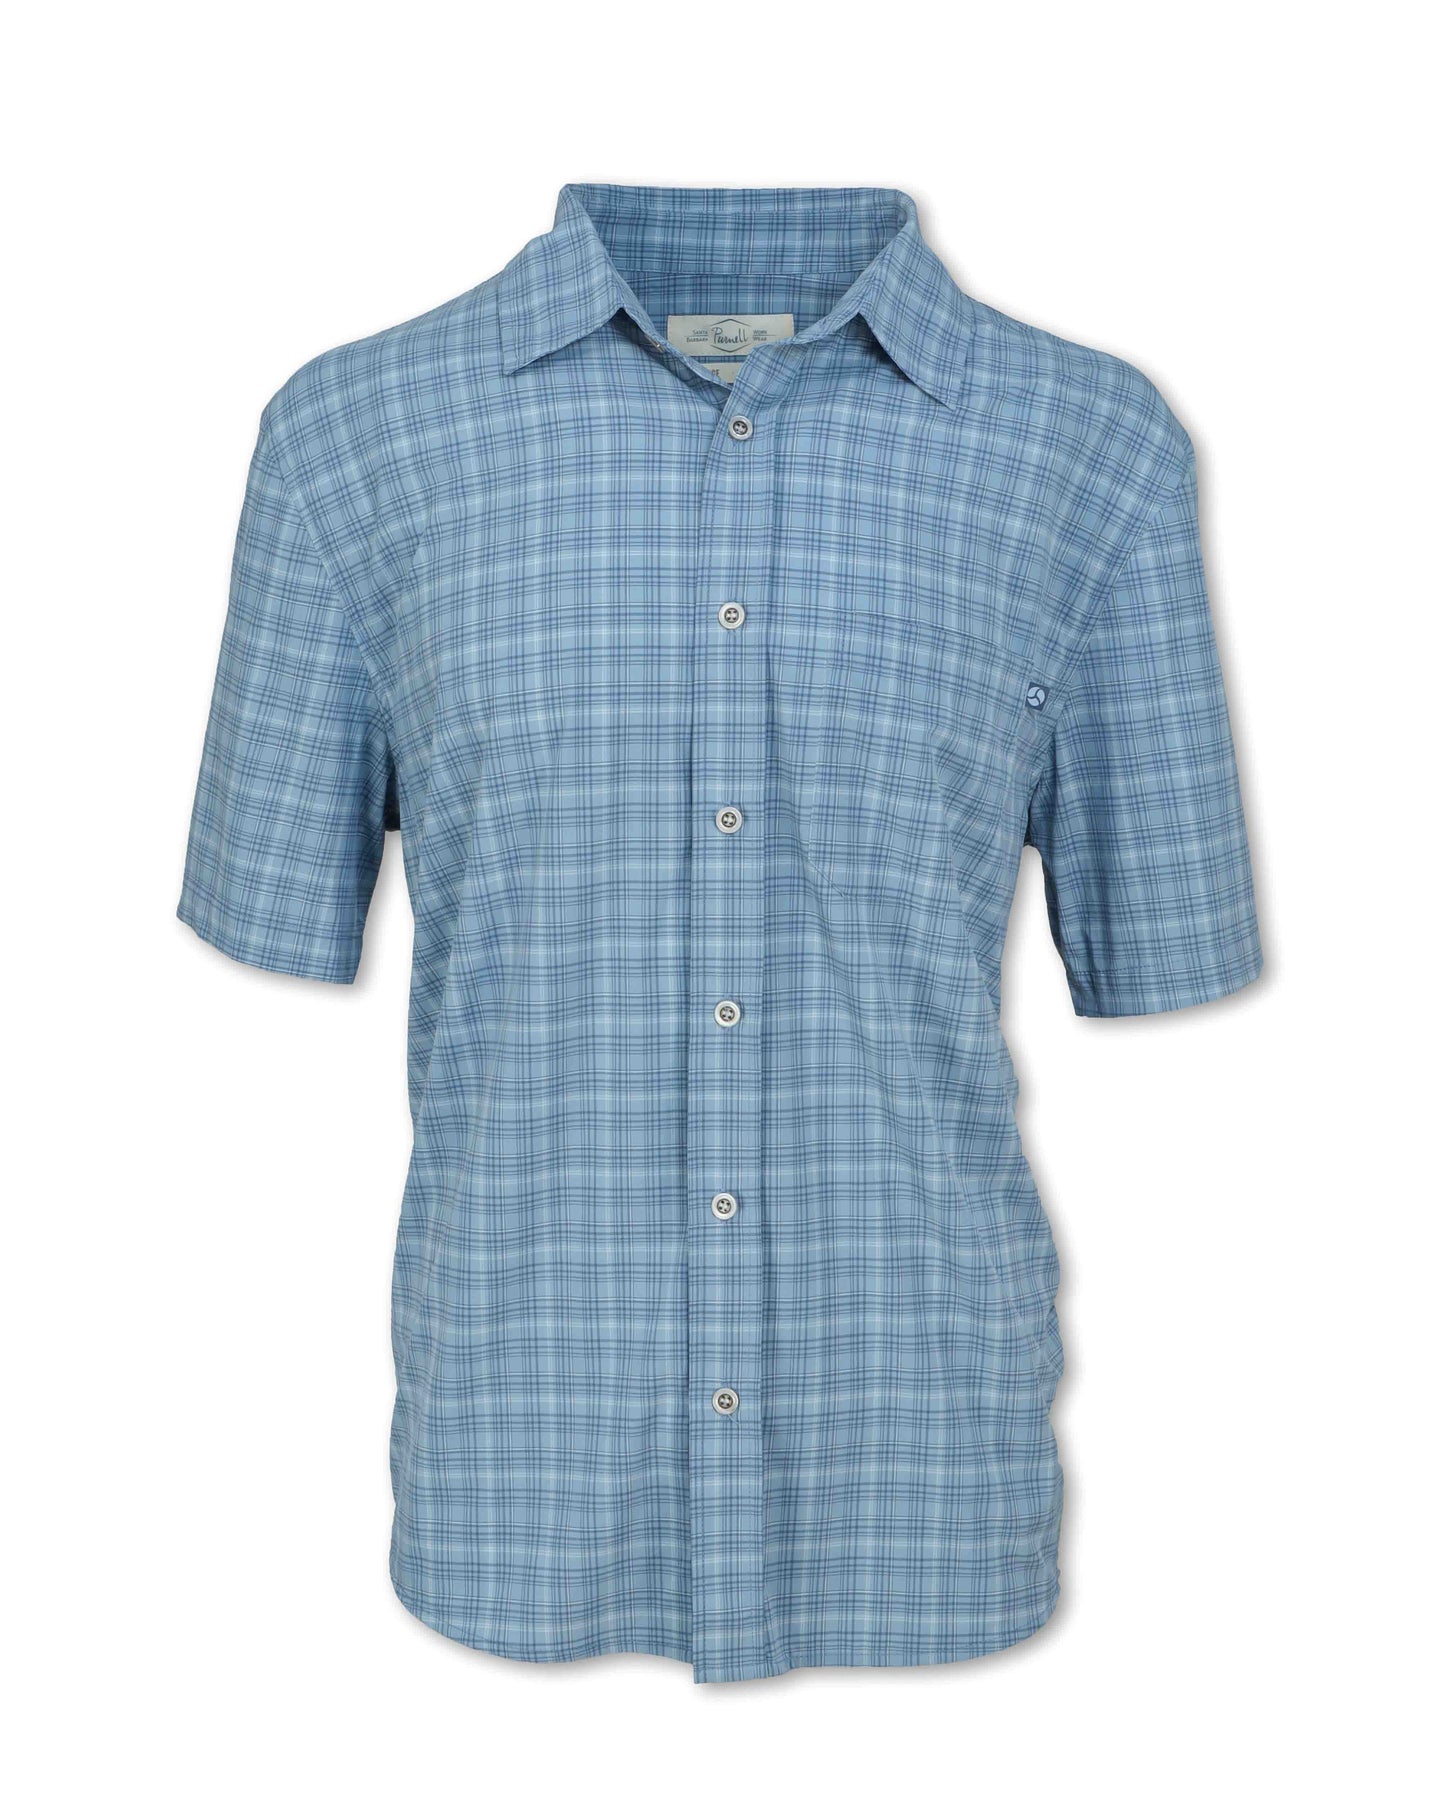 M's Short Sleeved 4-Way Stretch Quick Dry Shirt